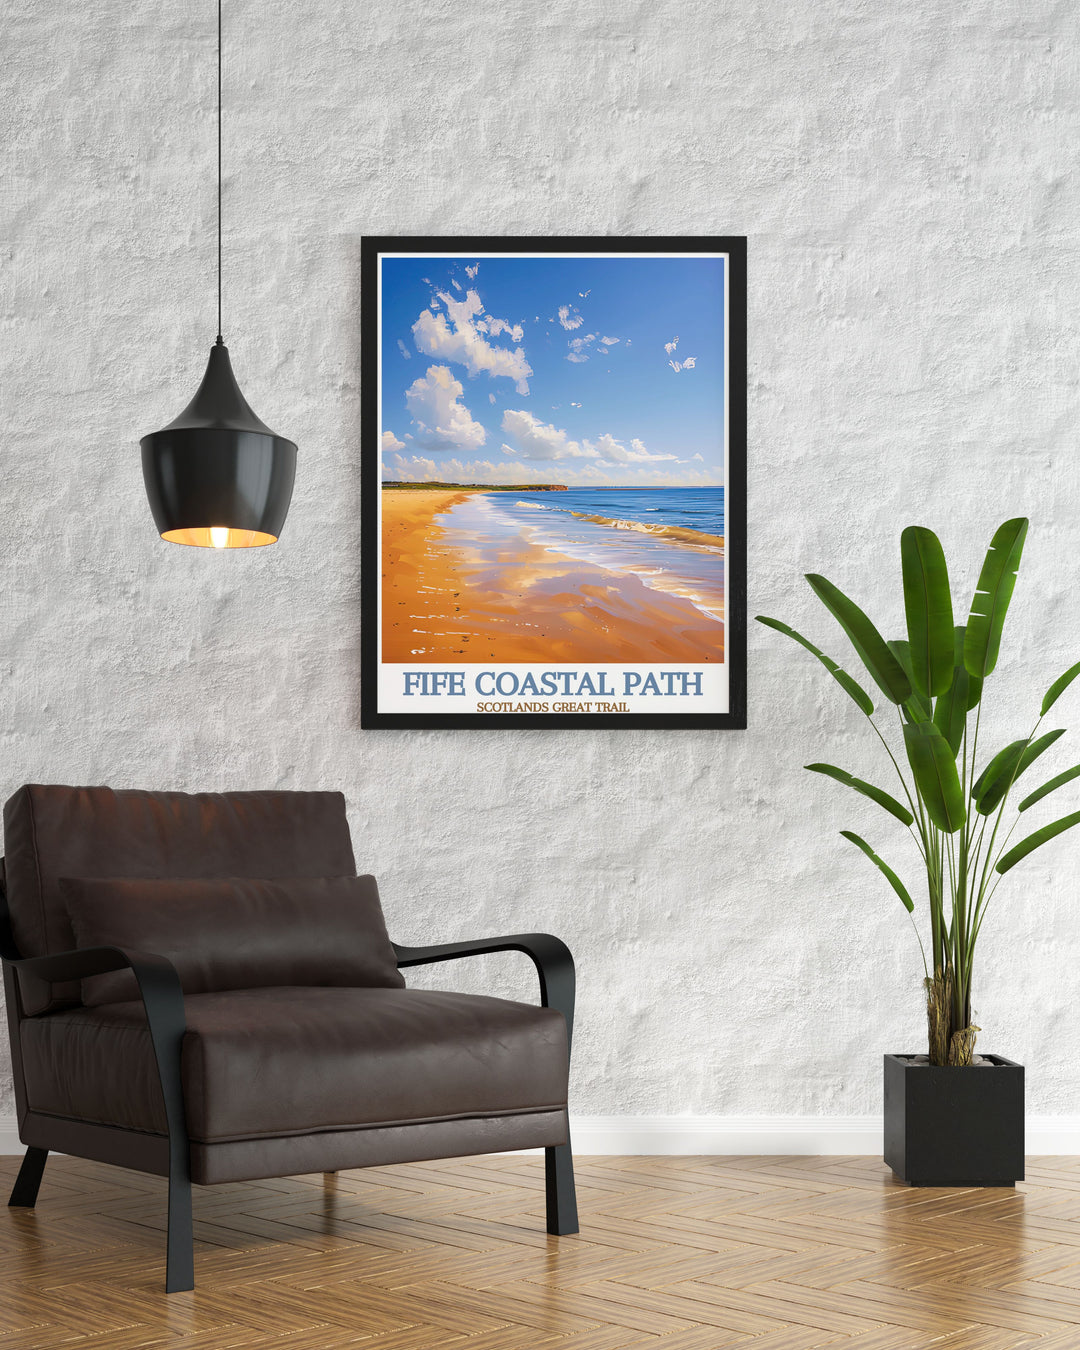 This travel poster of the Fife Coastal Path captures the dramatic beauty and serene environment of one of Scotlands most treasured natural landmarks, offering a glimpse into Scotlands stunning wilderness.